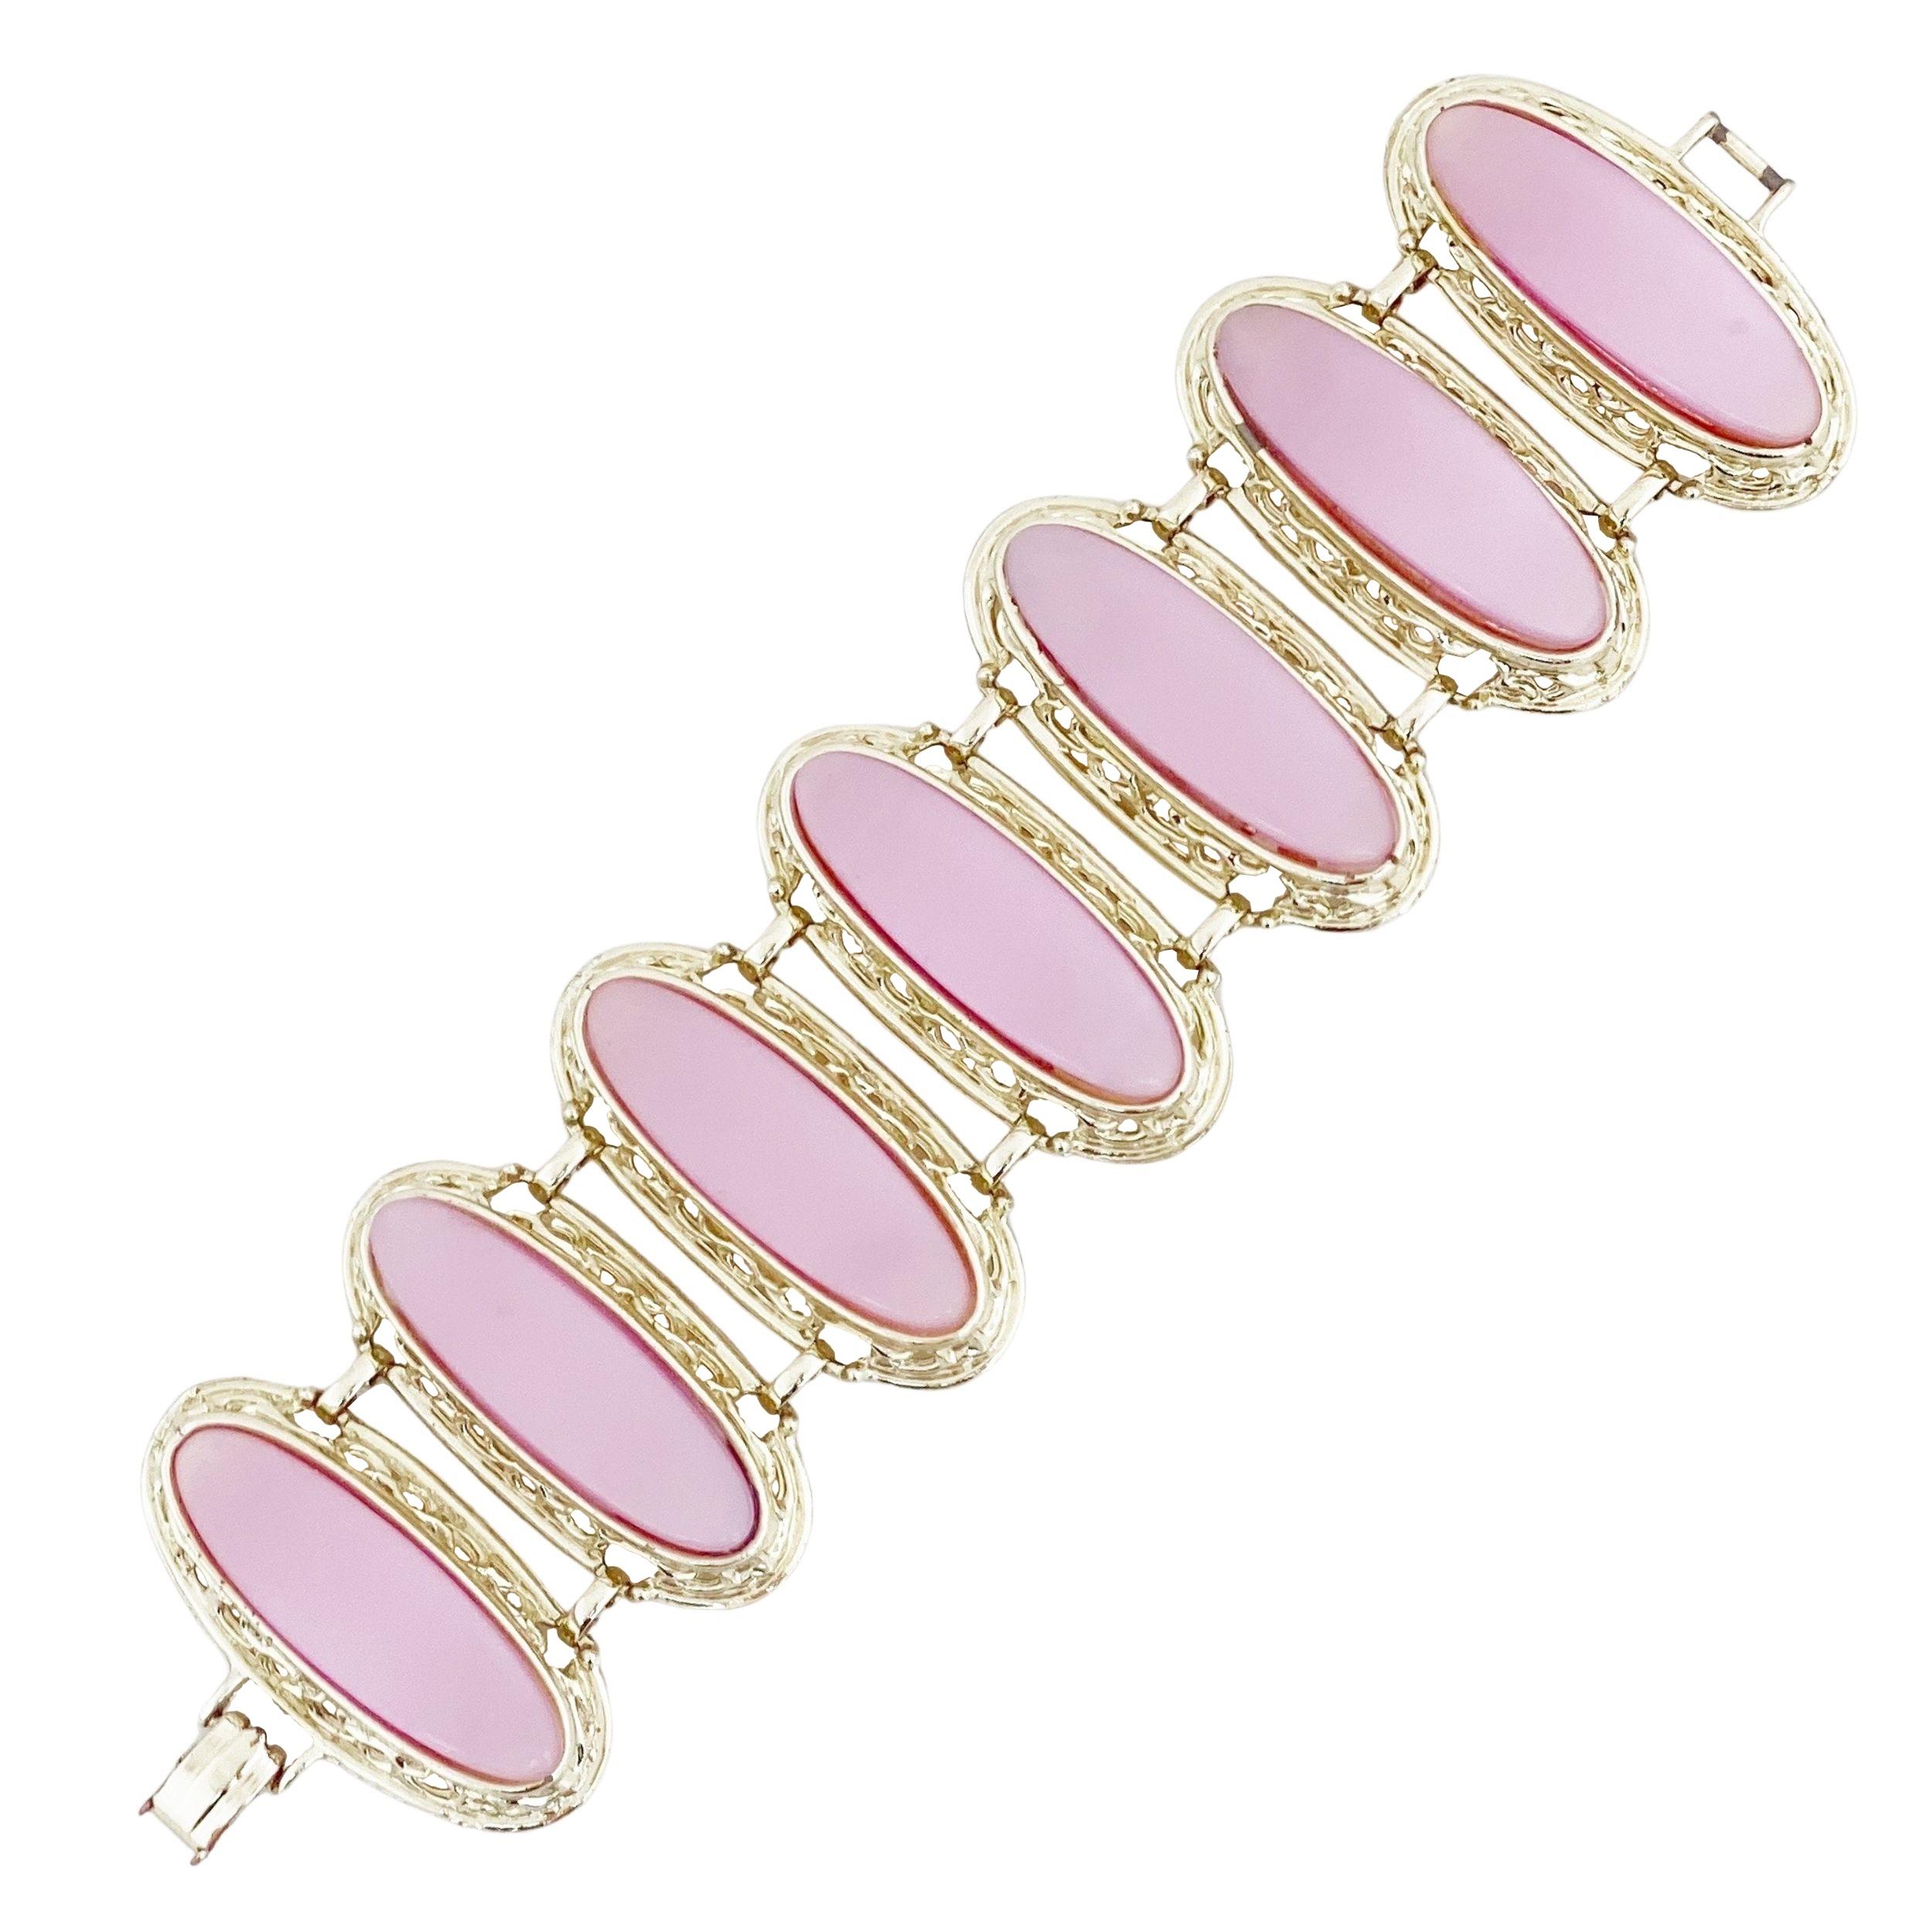 Dusty Pink Moonglow Thermoset Oversized Panel Bracelet, 1950s For Sale